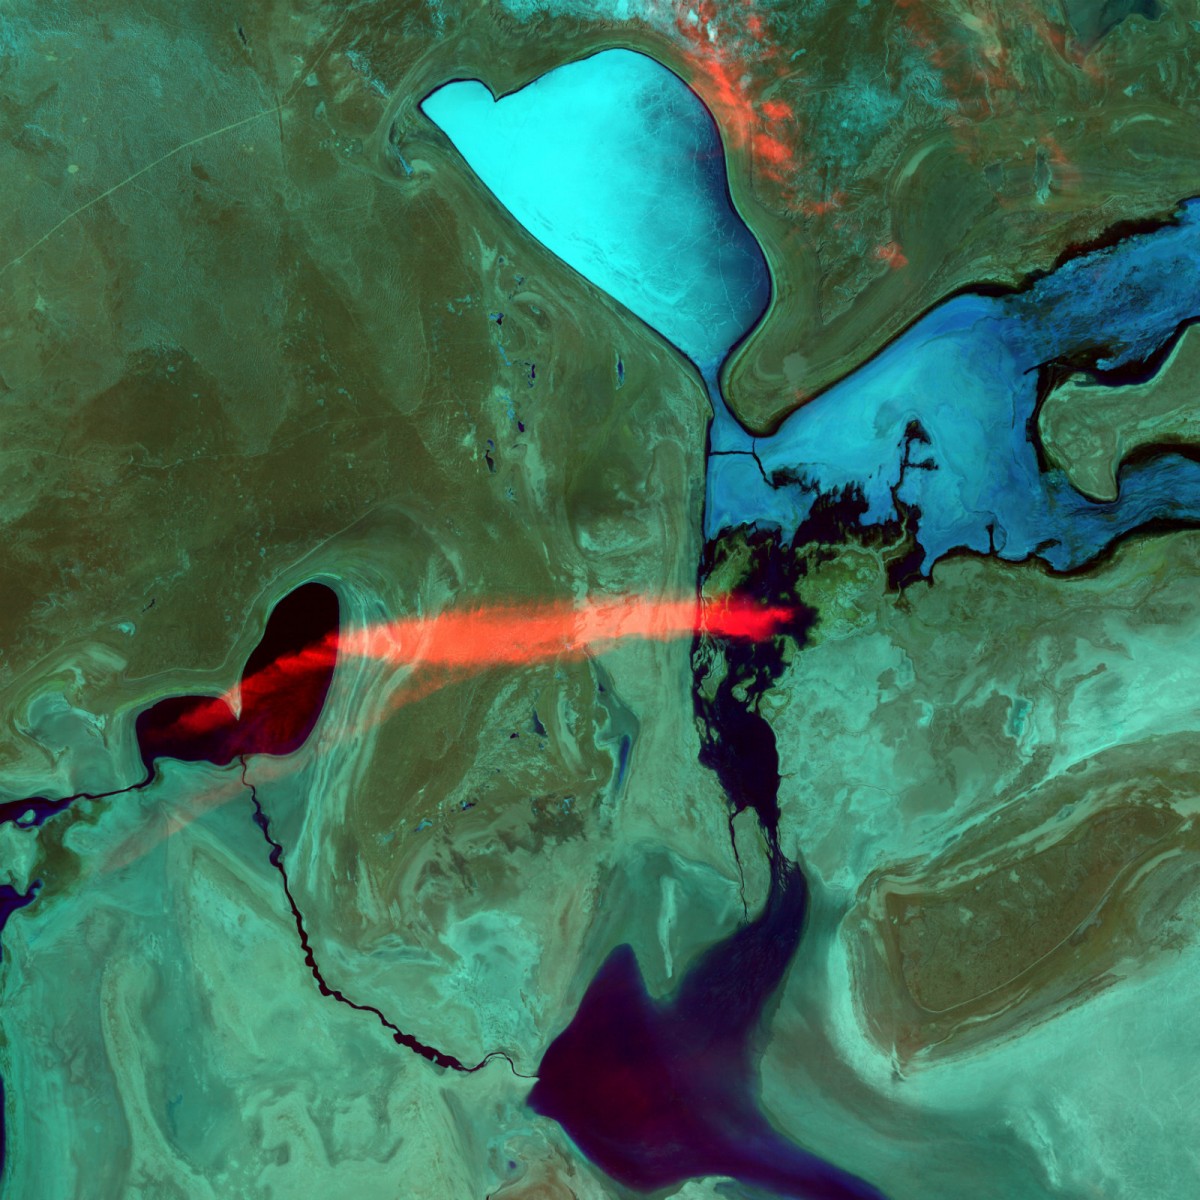 Satellite photo looking down on four connected blue lakes spread over a green landscape with a single bright red streak floating over them.